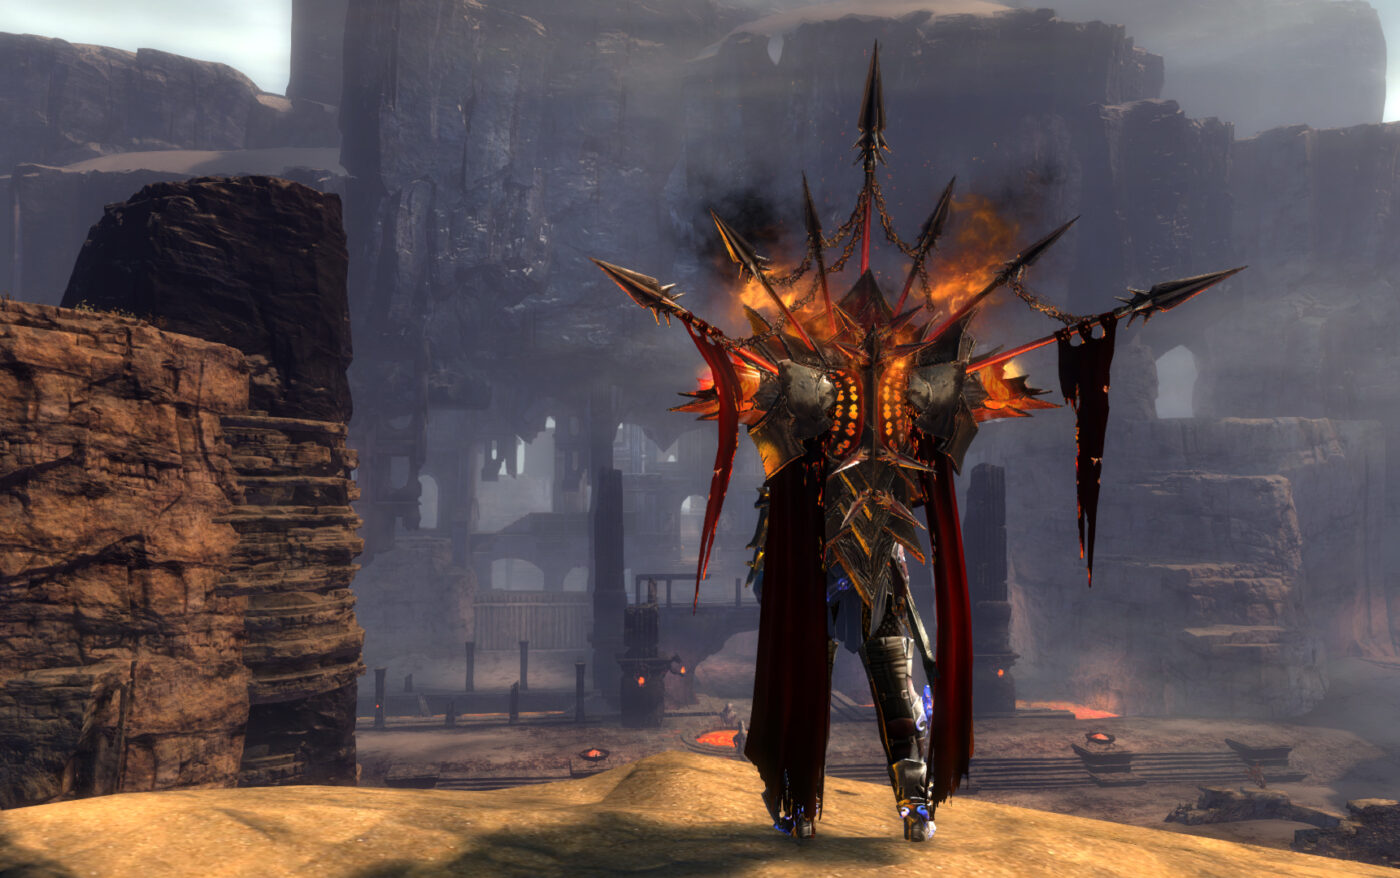 Legendary Armor Pvp Account Bound Requirement Items To Get In GW2